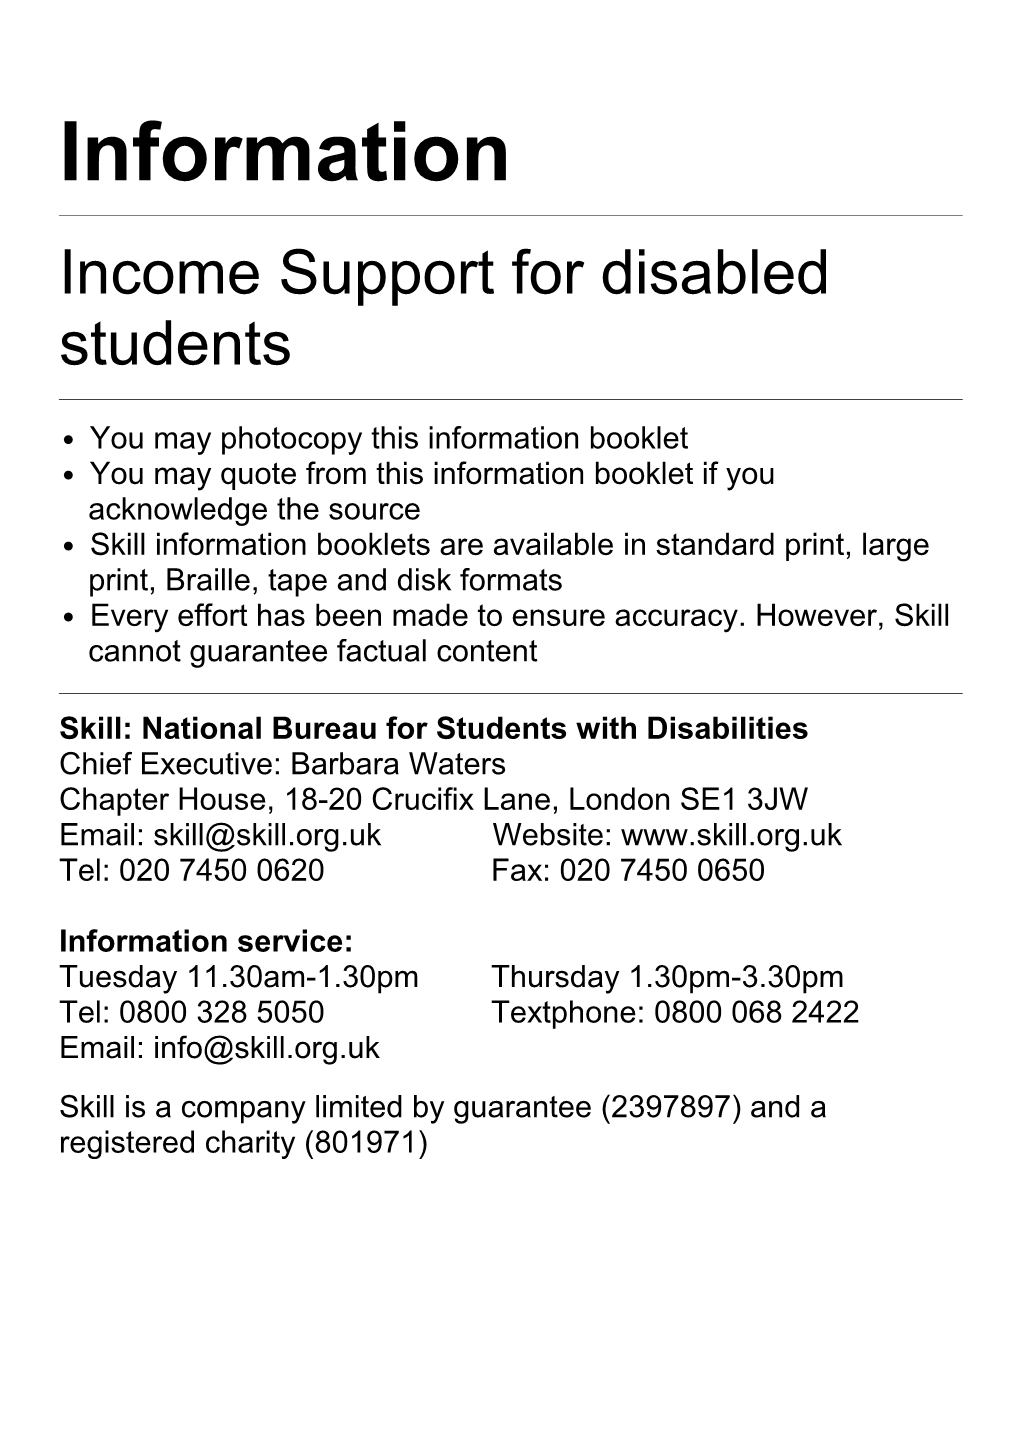 Income Support for Disabled Students